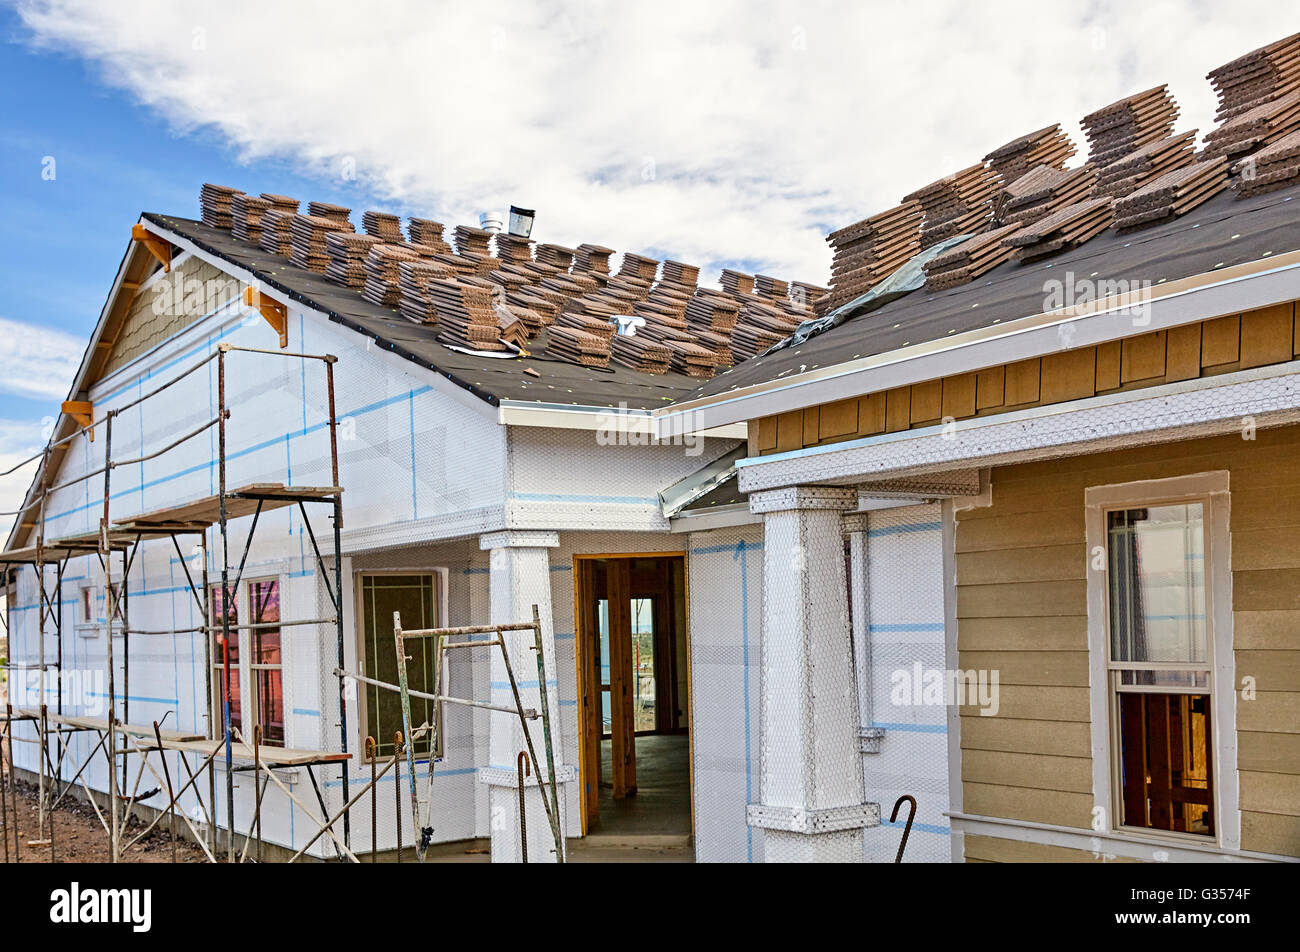 Home building industry house prep for stucco and roofing Stock Photo